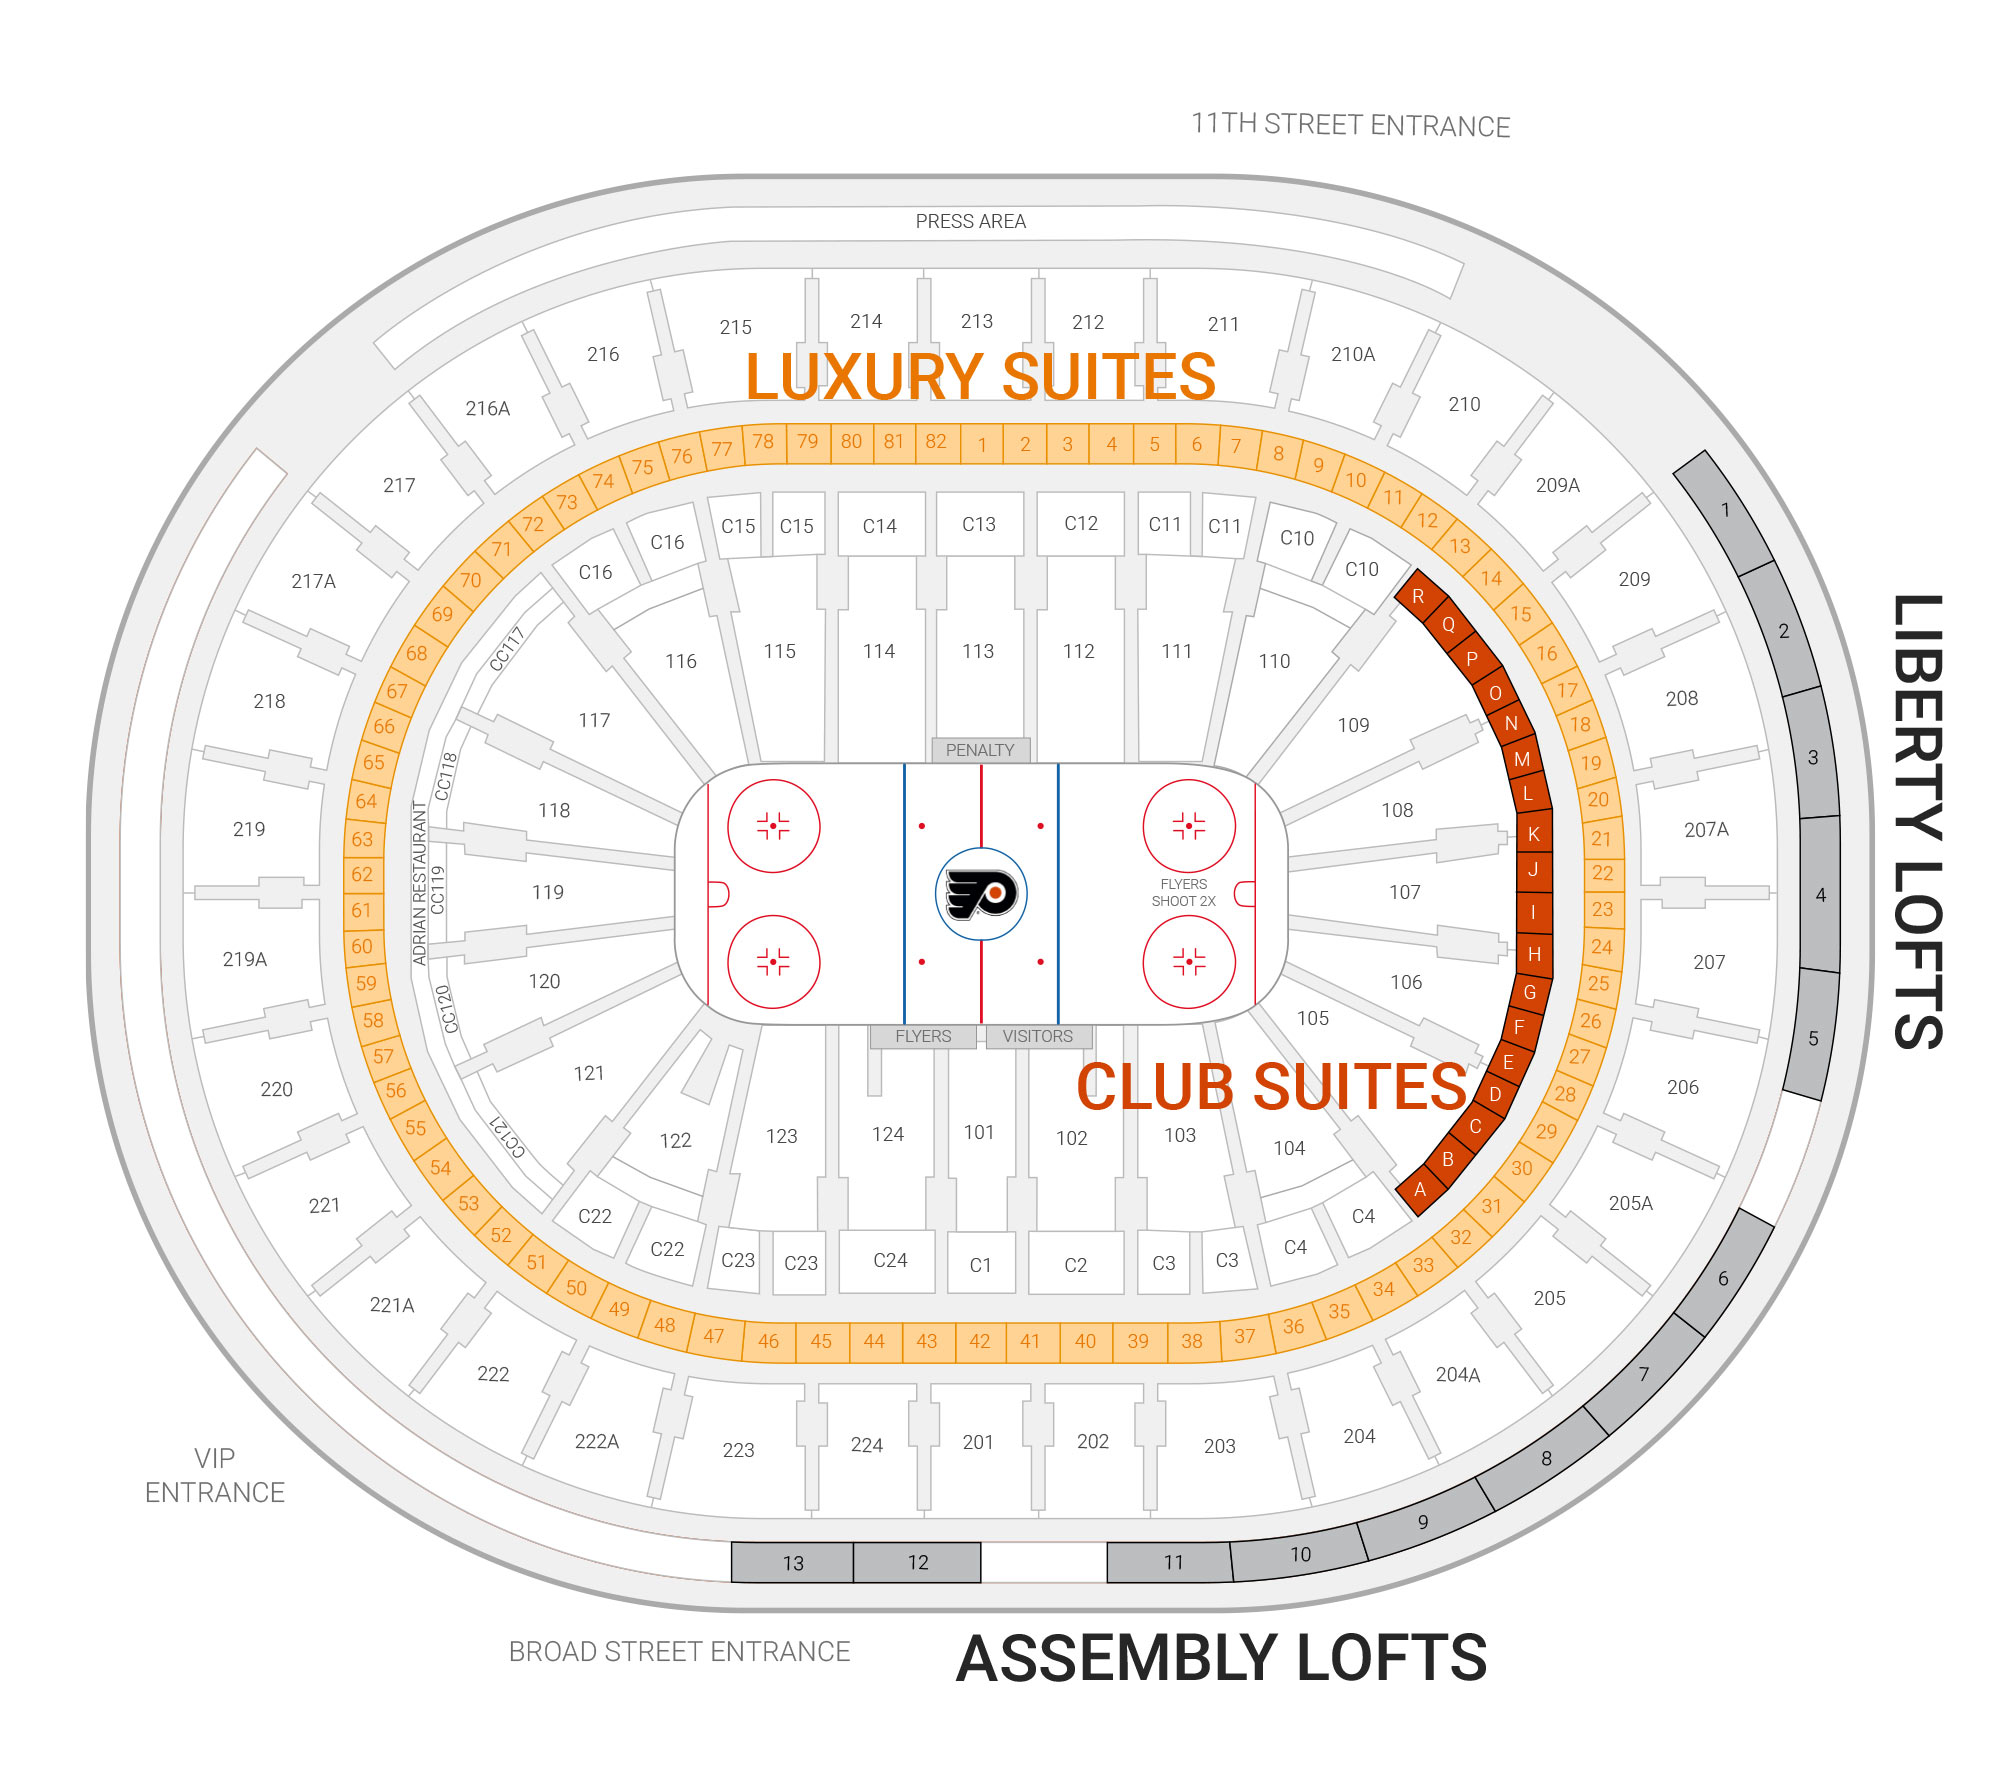 Wells Fargo Center / Philadelphia Flyers Suite Map and Seating Chart